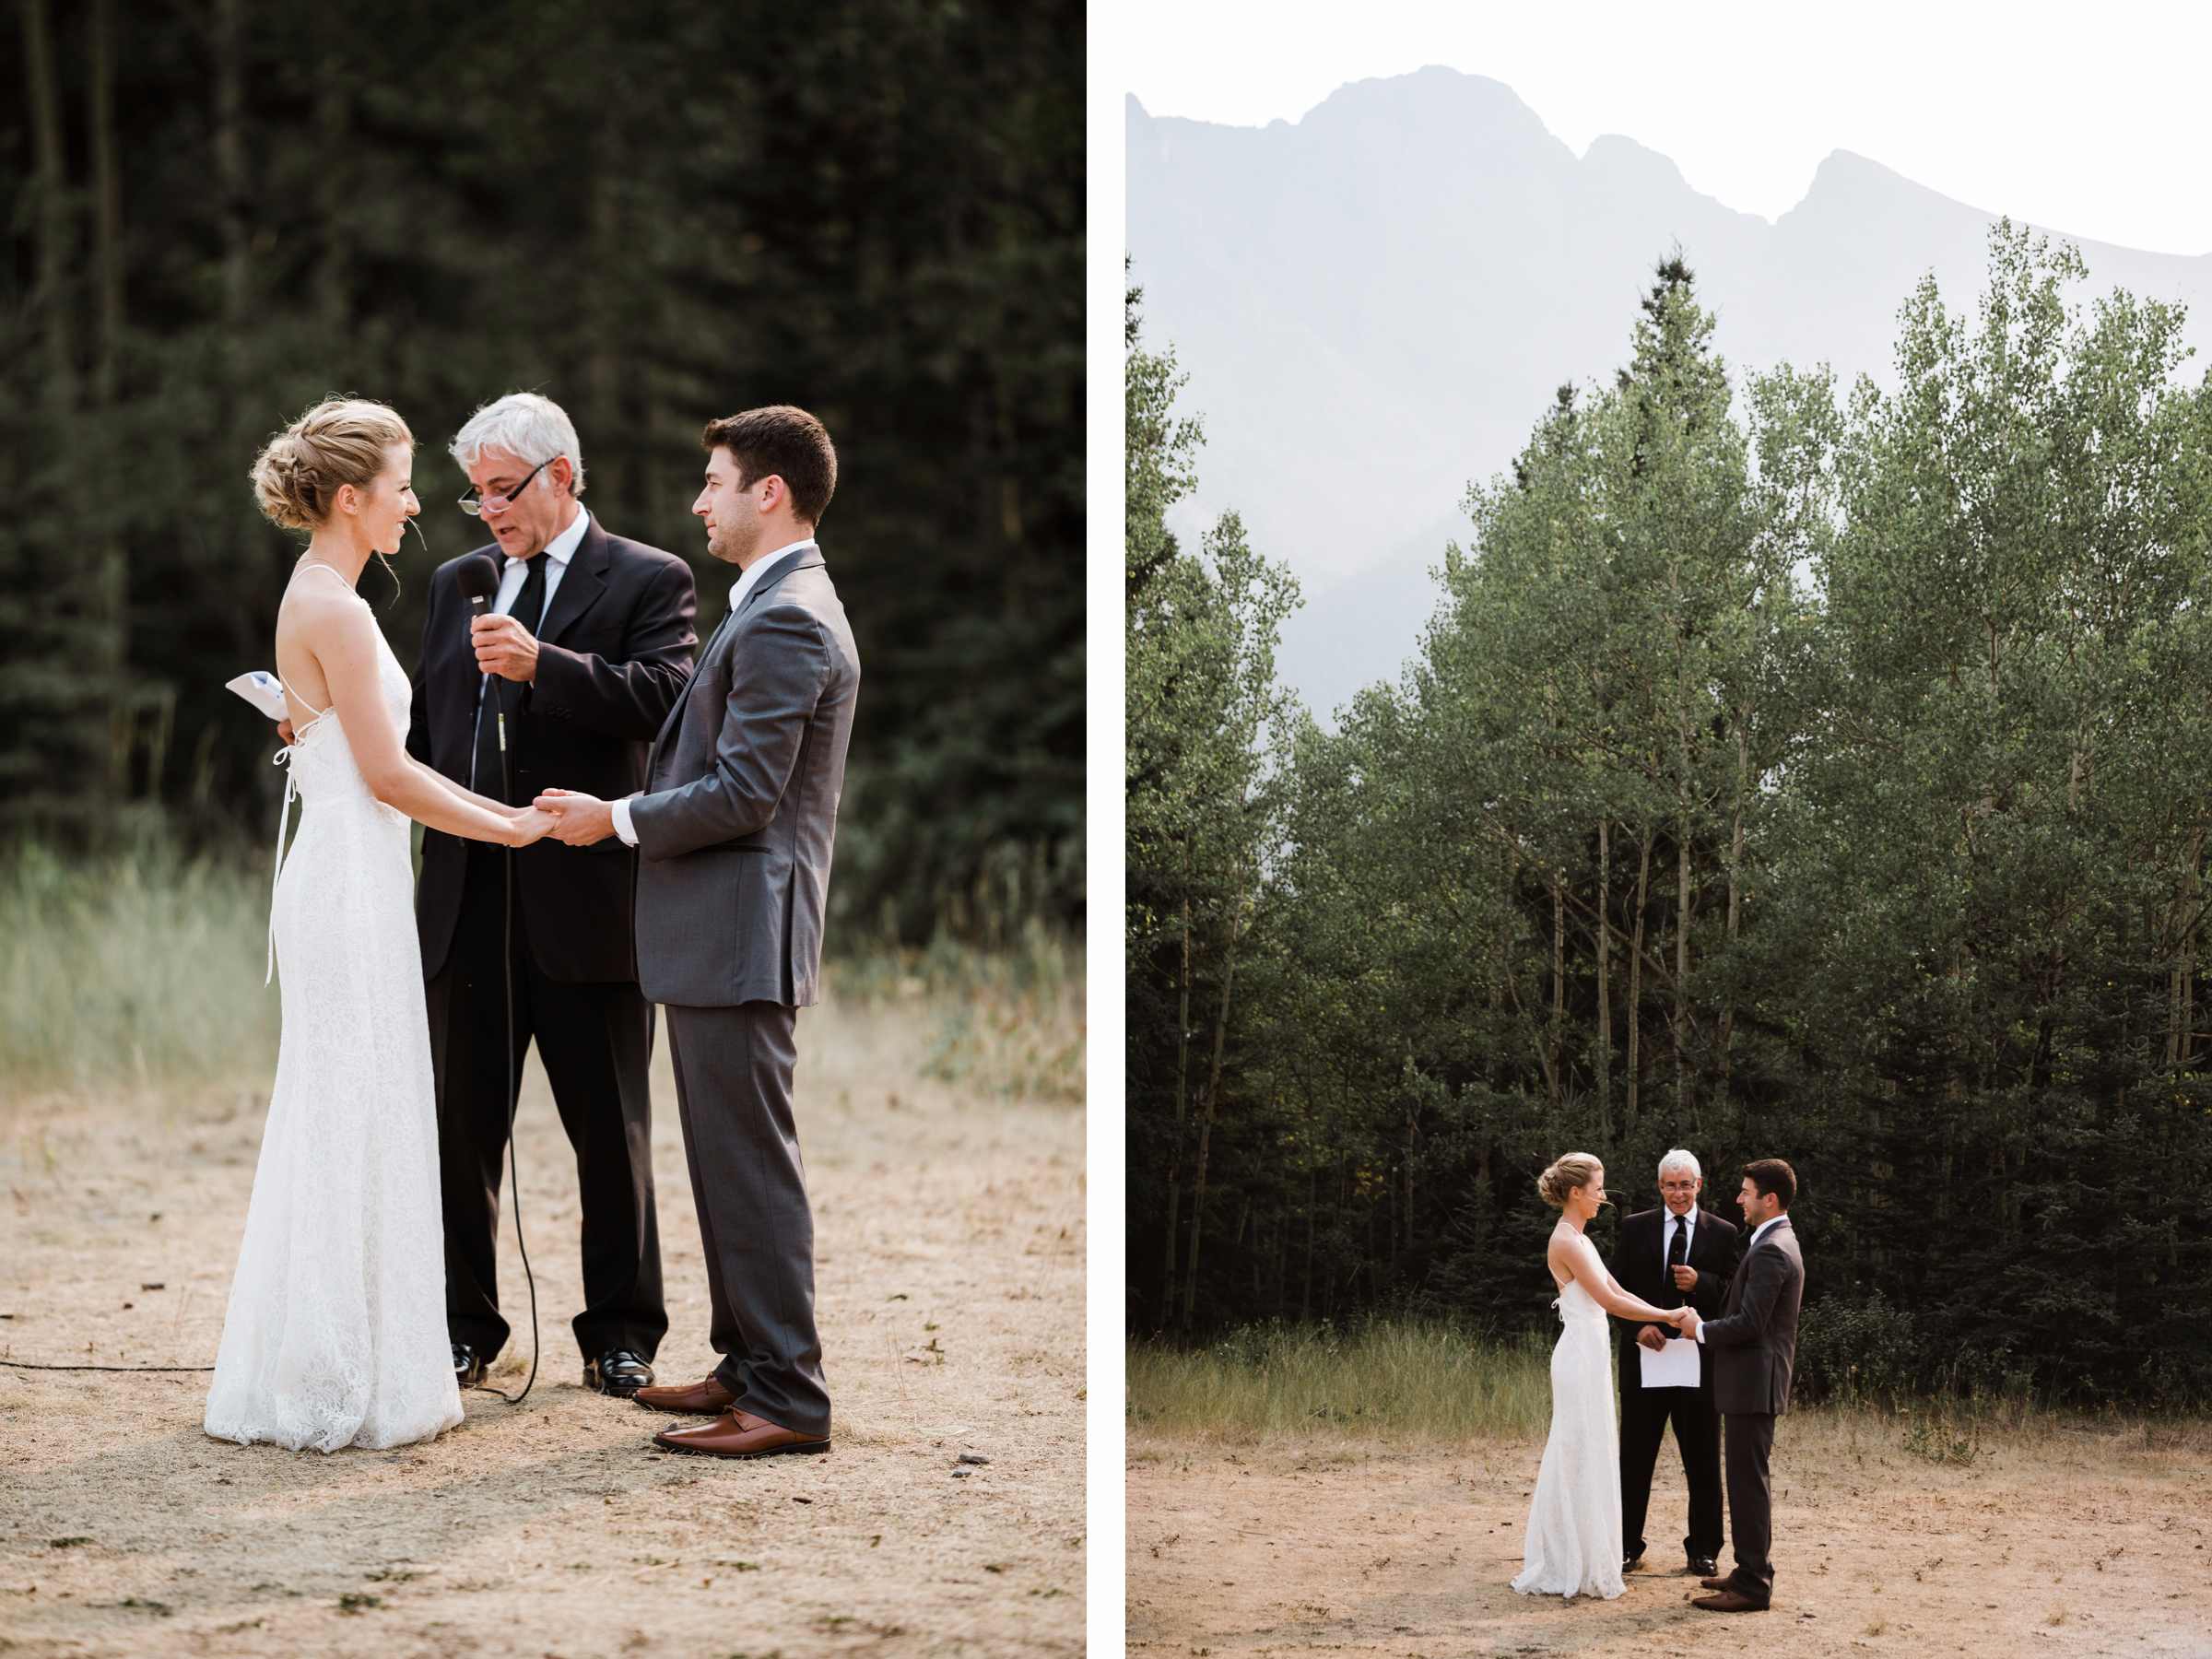 Calgary wedding photographer at Canmore and Banff destination elopement wedding in rocky mountains, Alberta, Canada - Photo 10